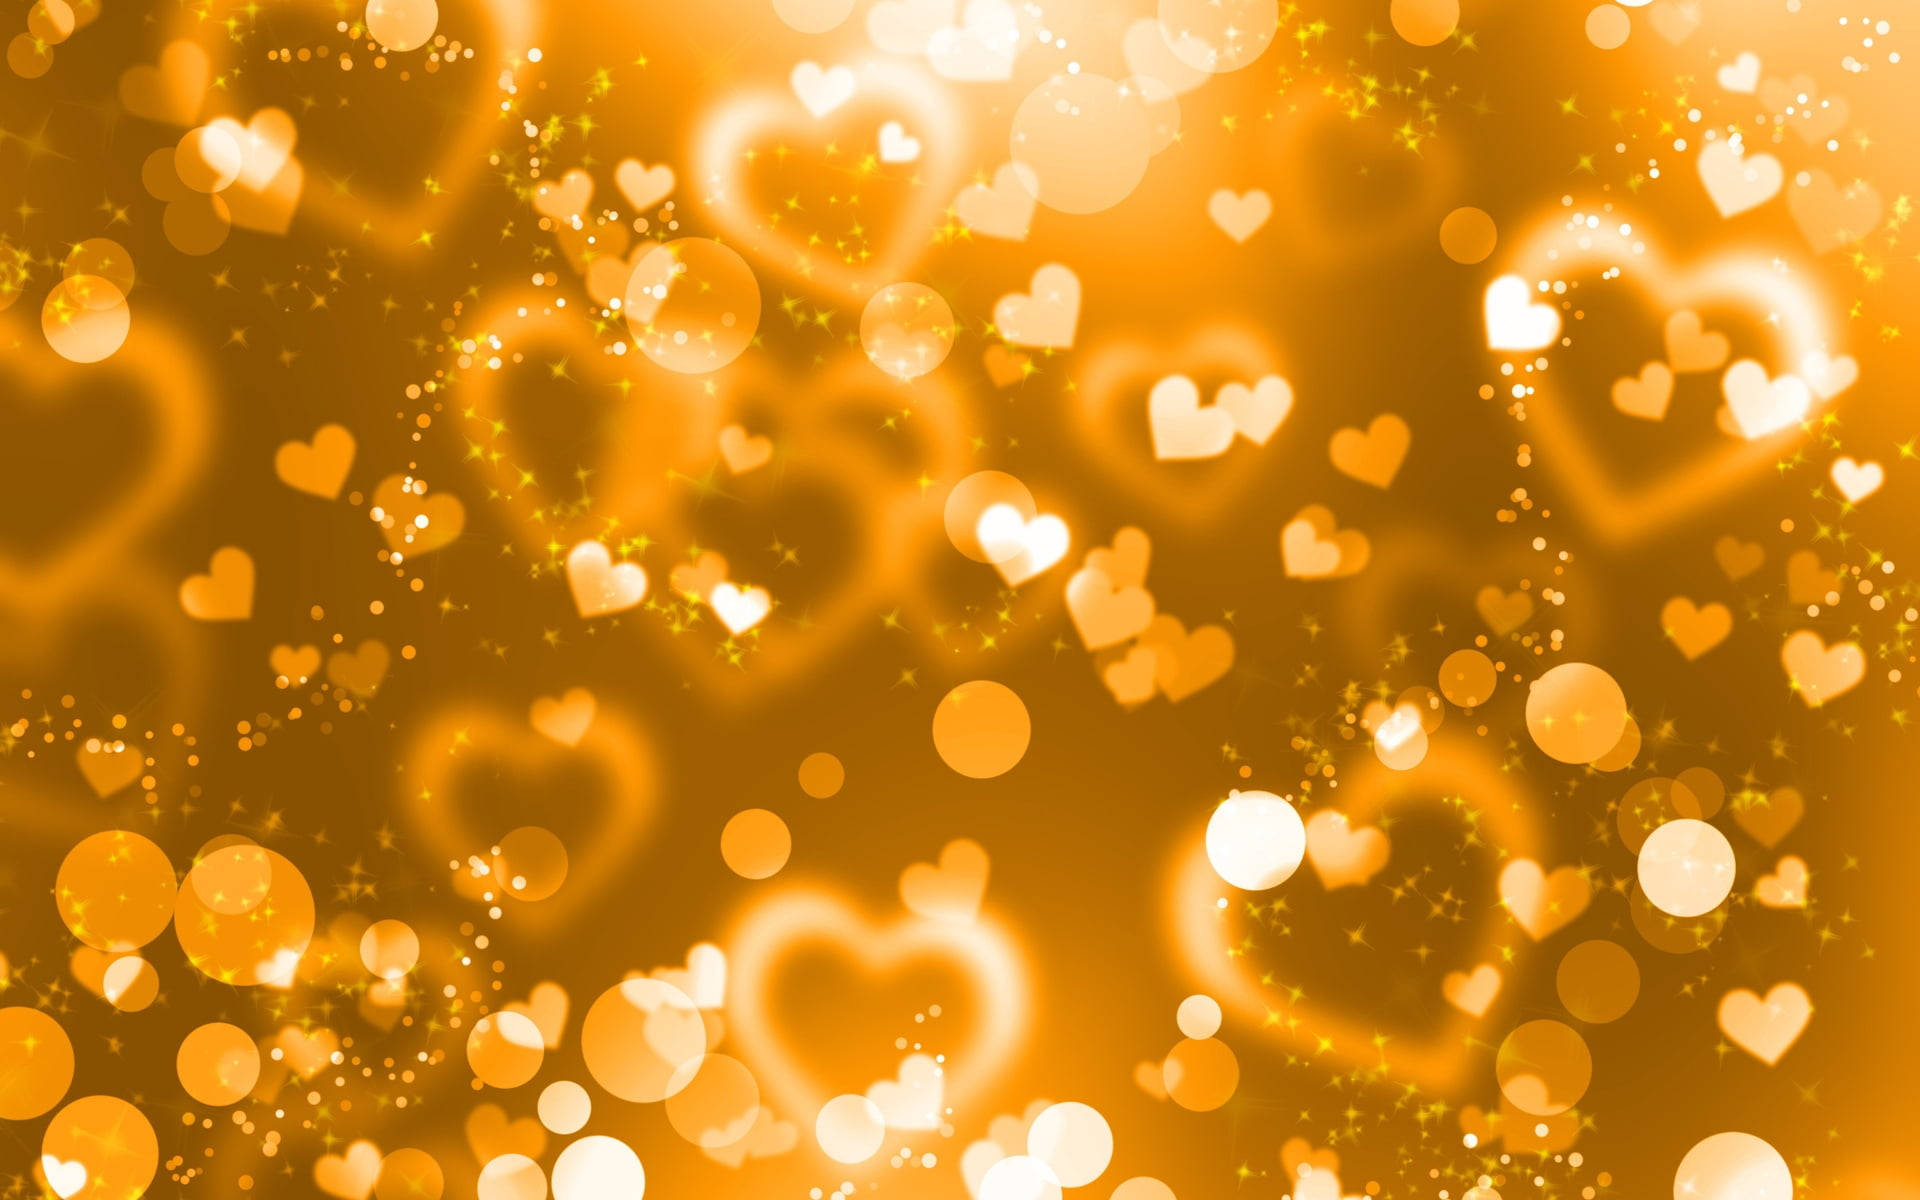 Golden Hearts And Circles Background